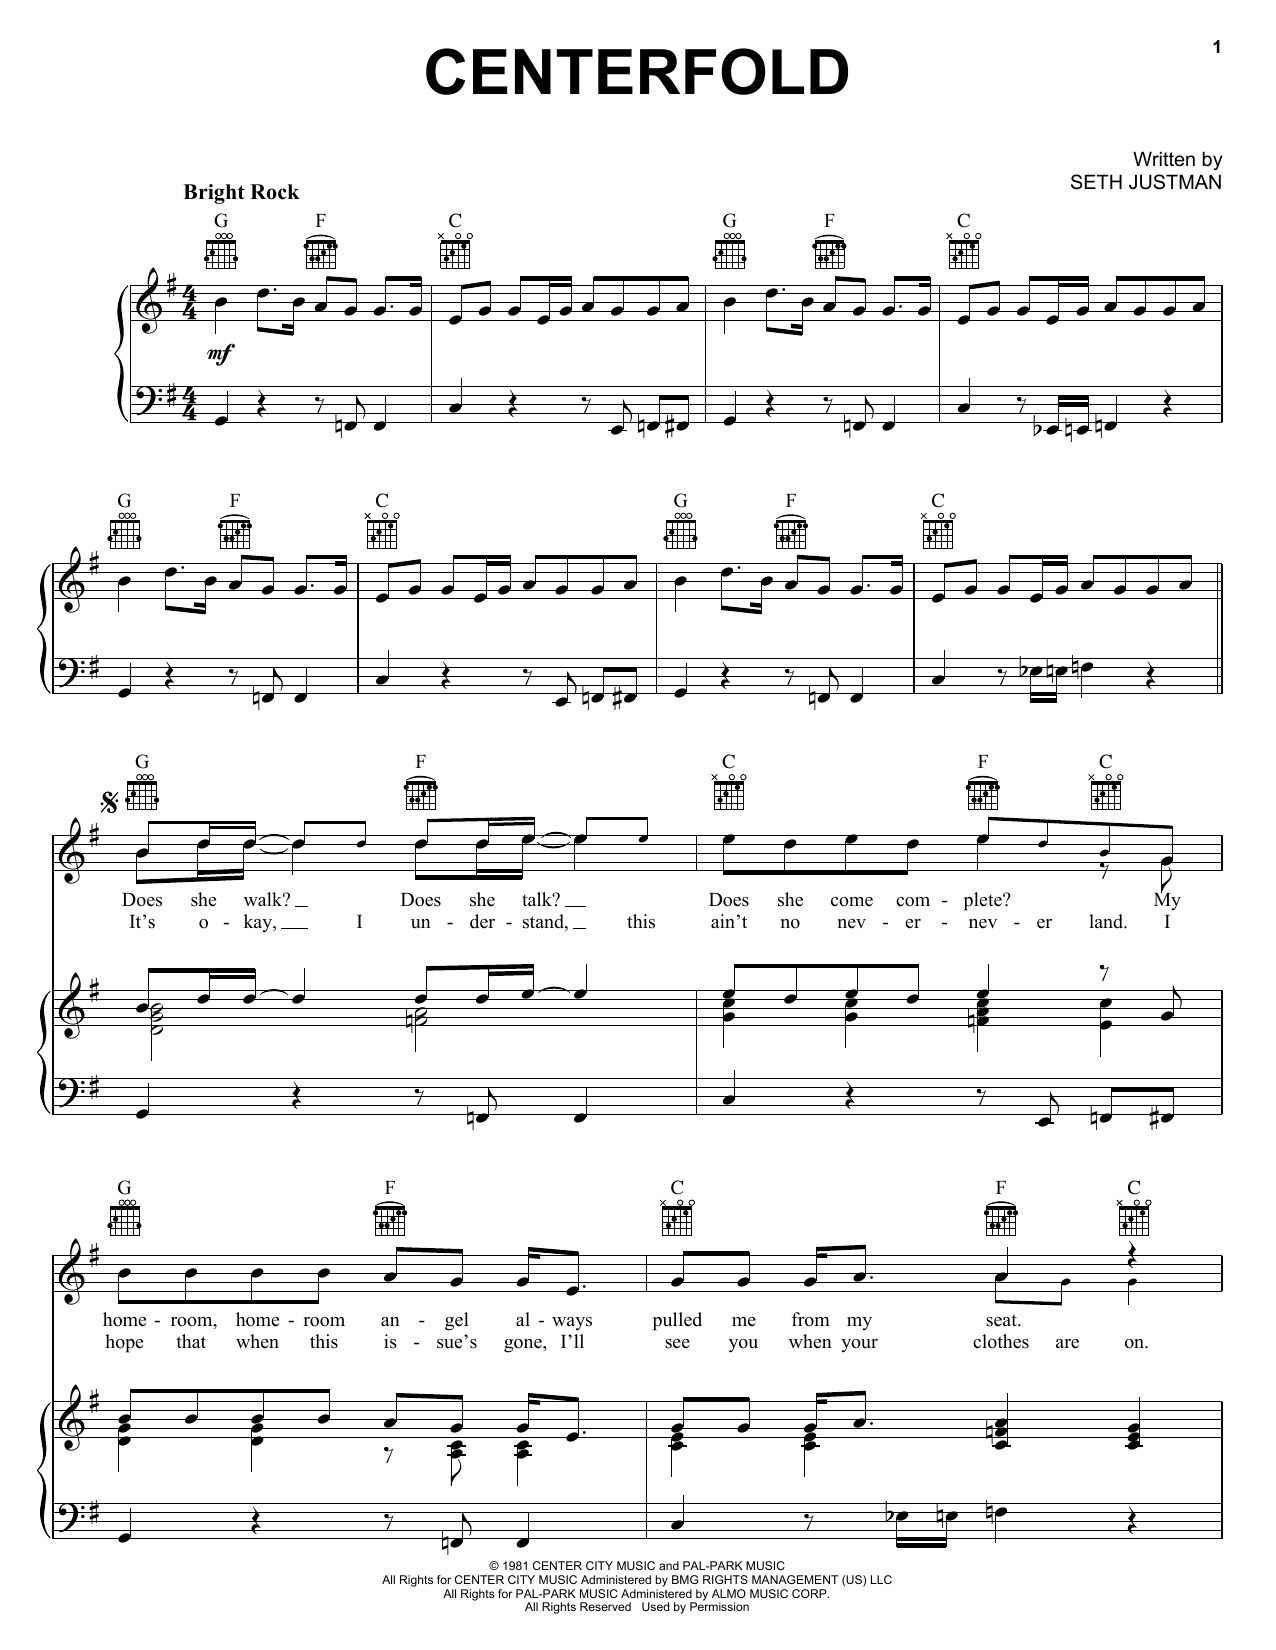 J. Geils Band Centerfold sheet music notes and chords. Download Printable PDF.